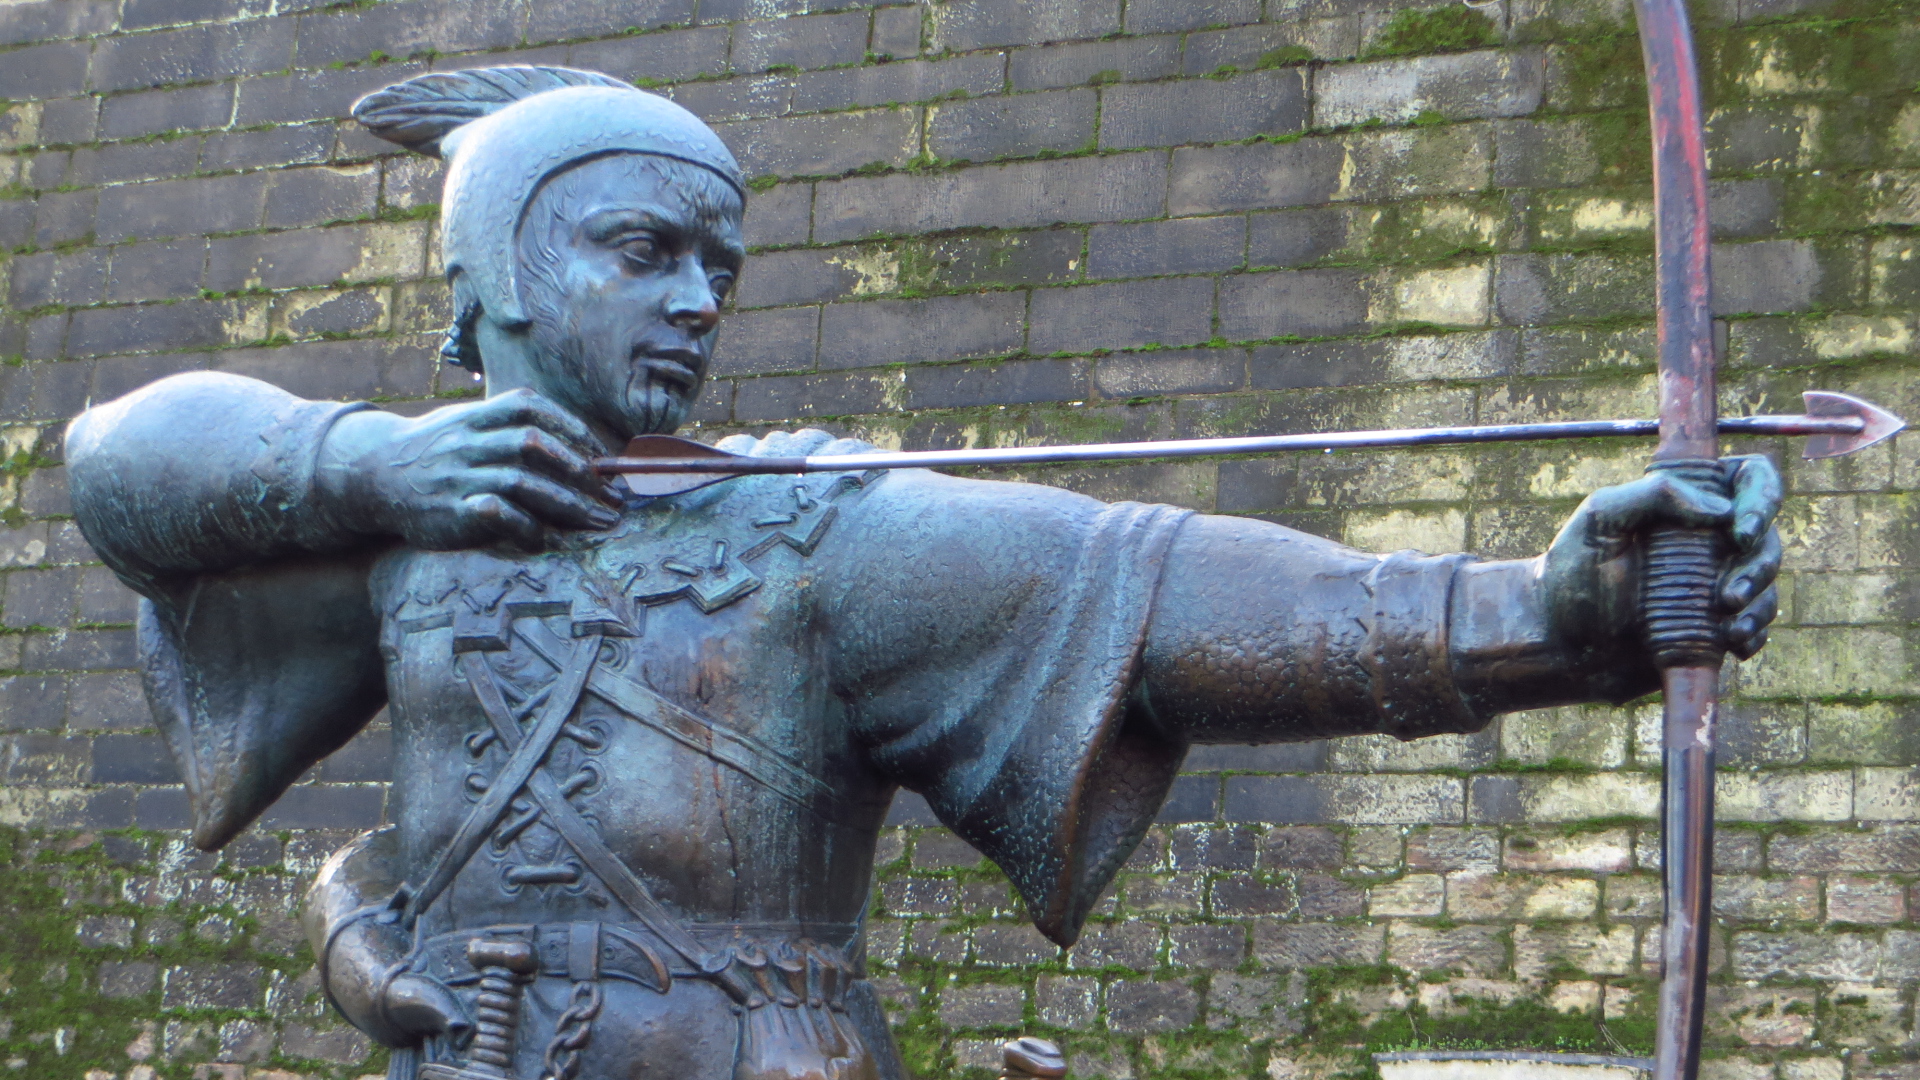 the statue in front of a brick wall is holding a spear